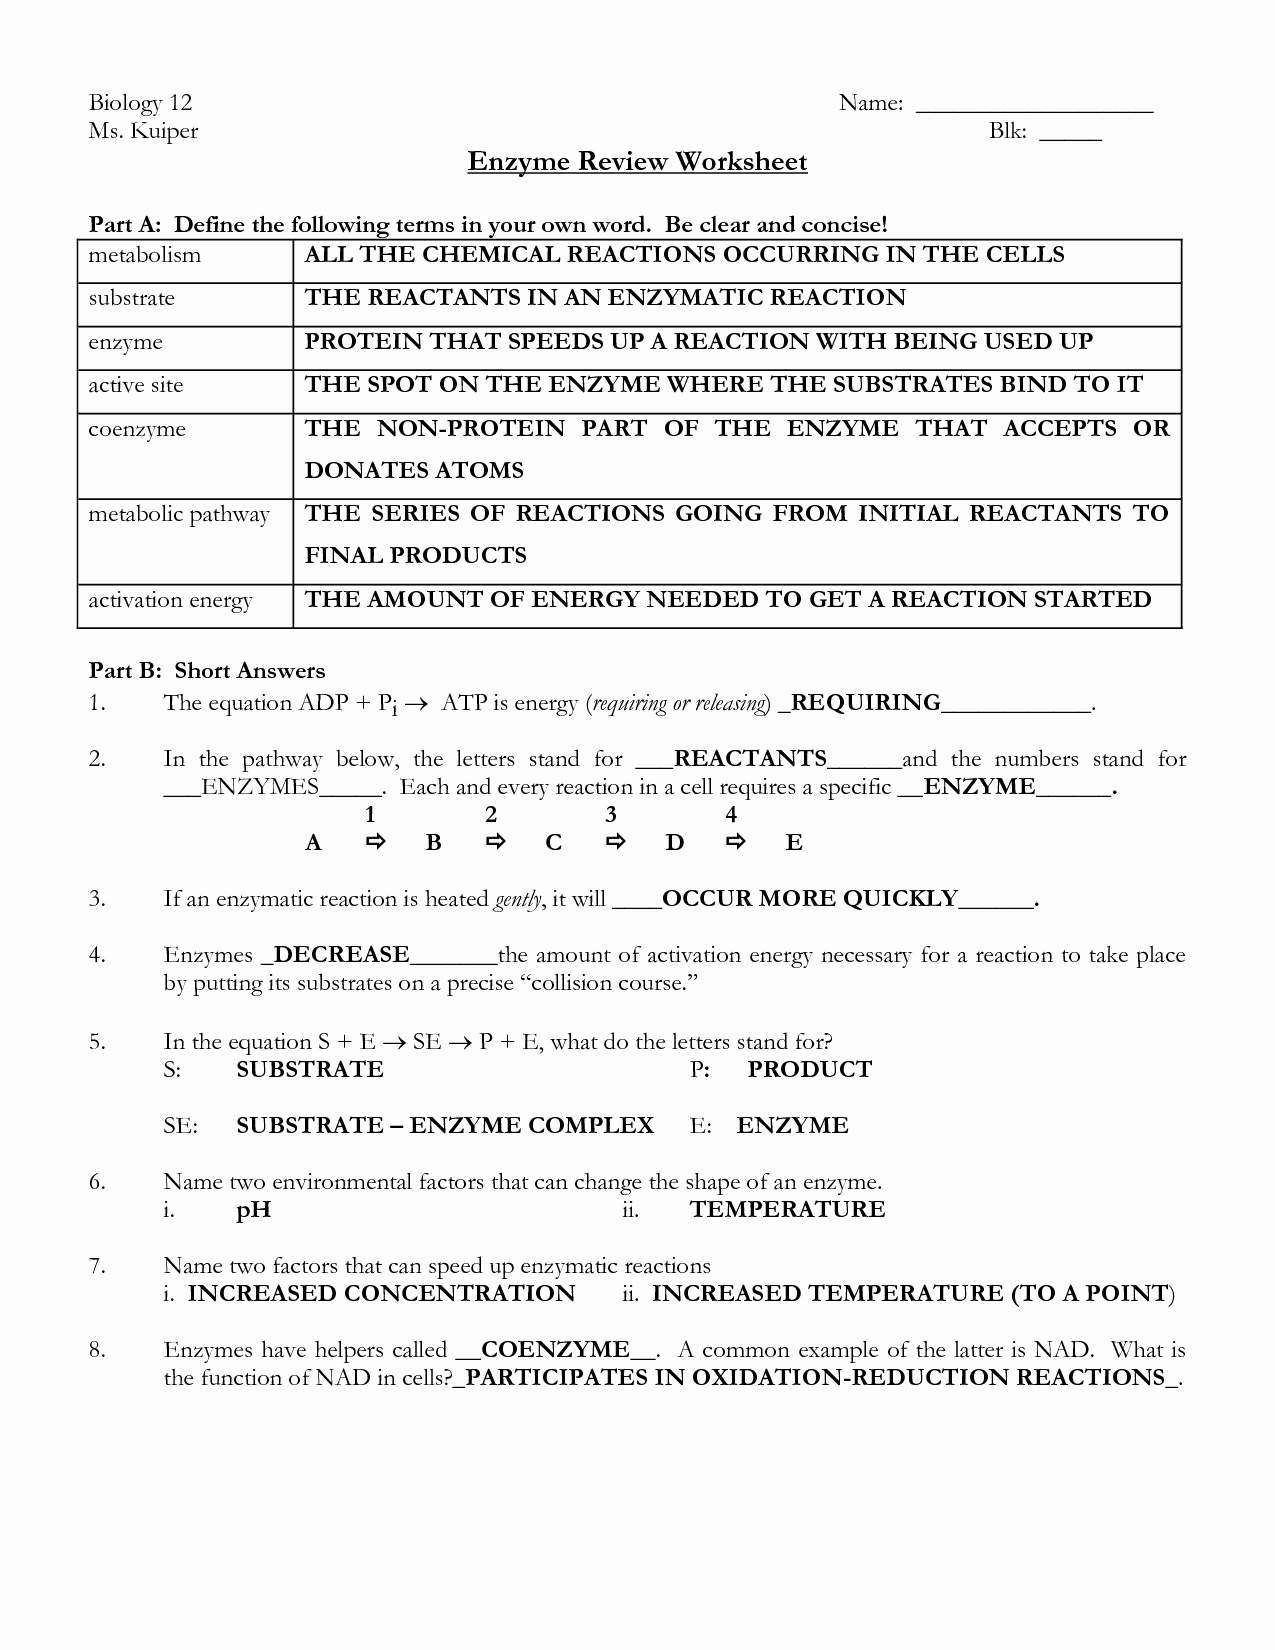 Enzyme Review Worksheet Answers Beautiful 20 Best Of Enzymes and Chemical Reactions Worksheet